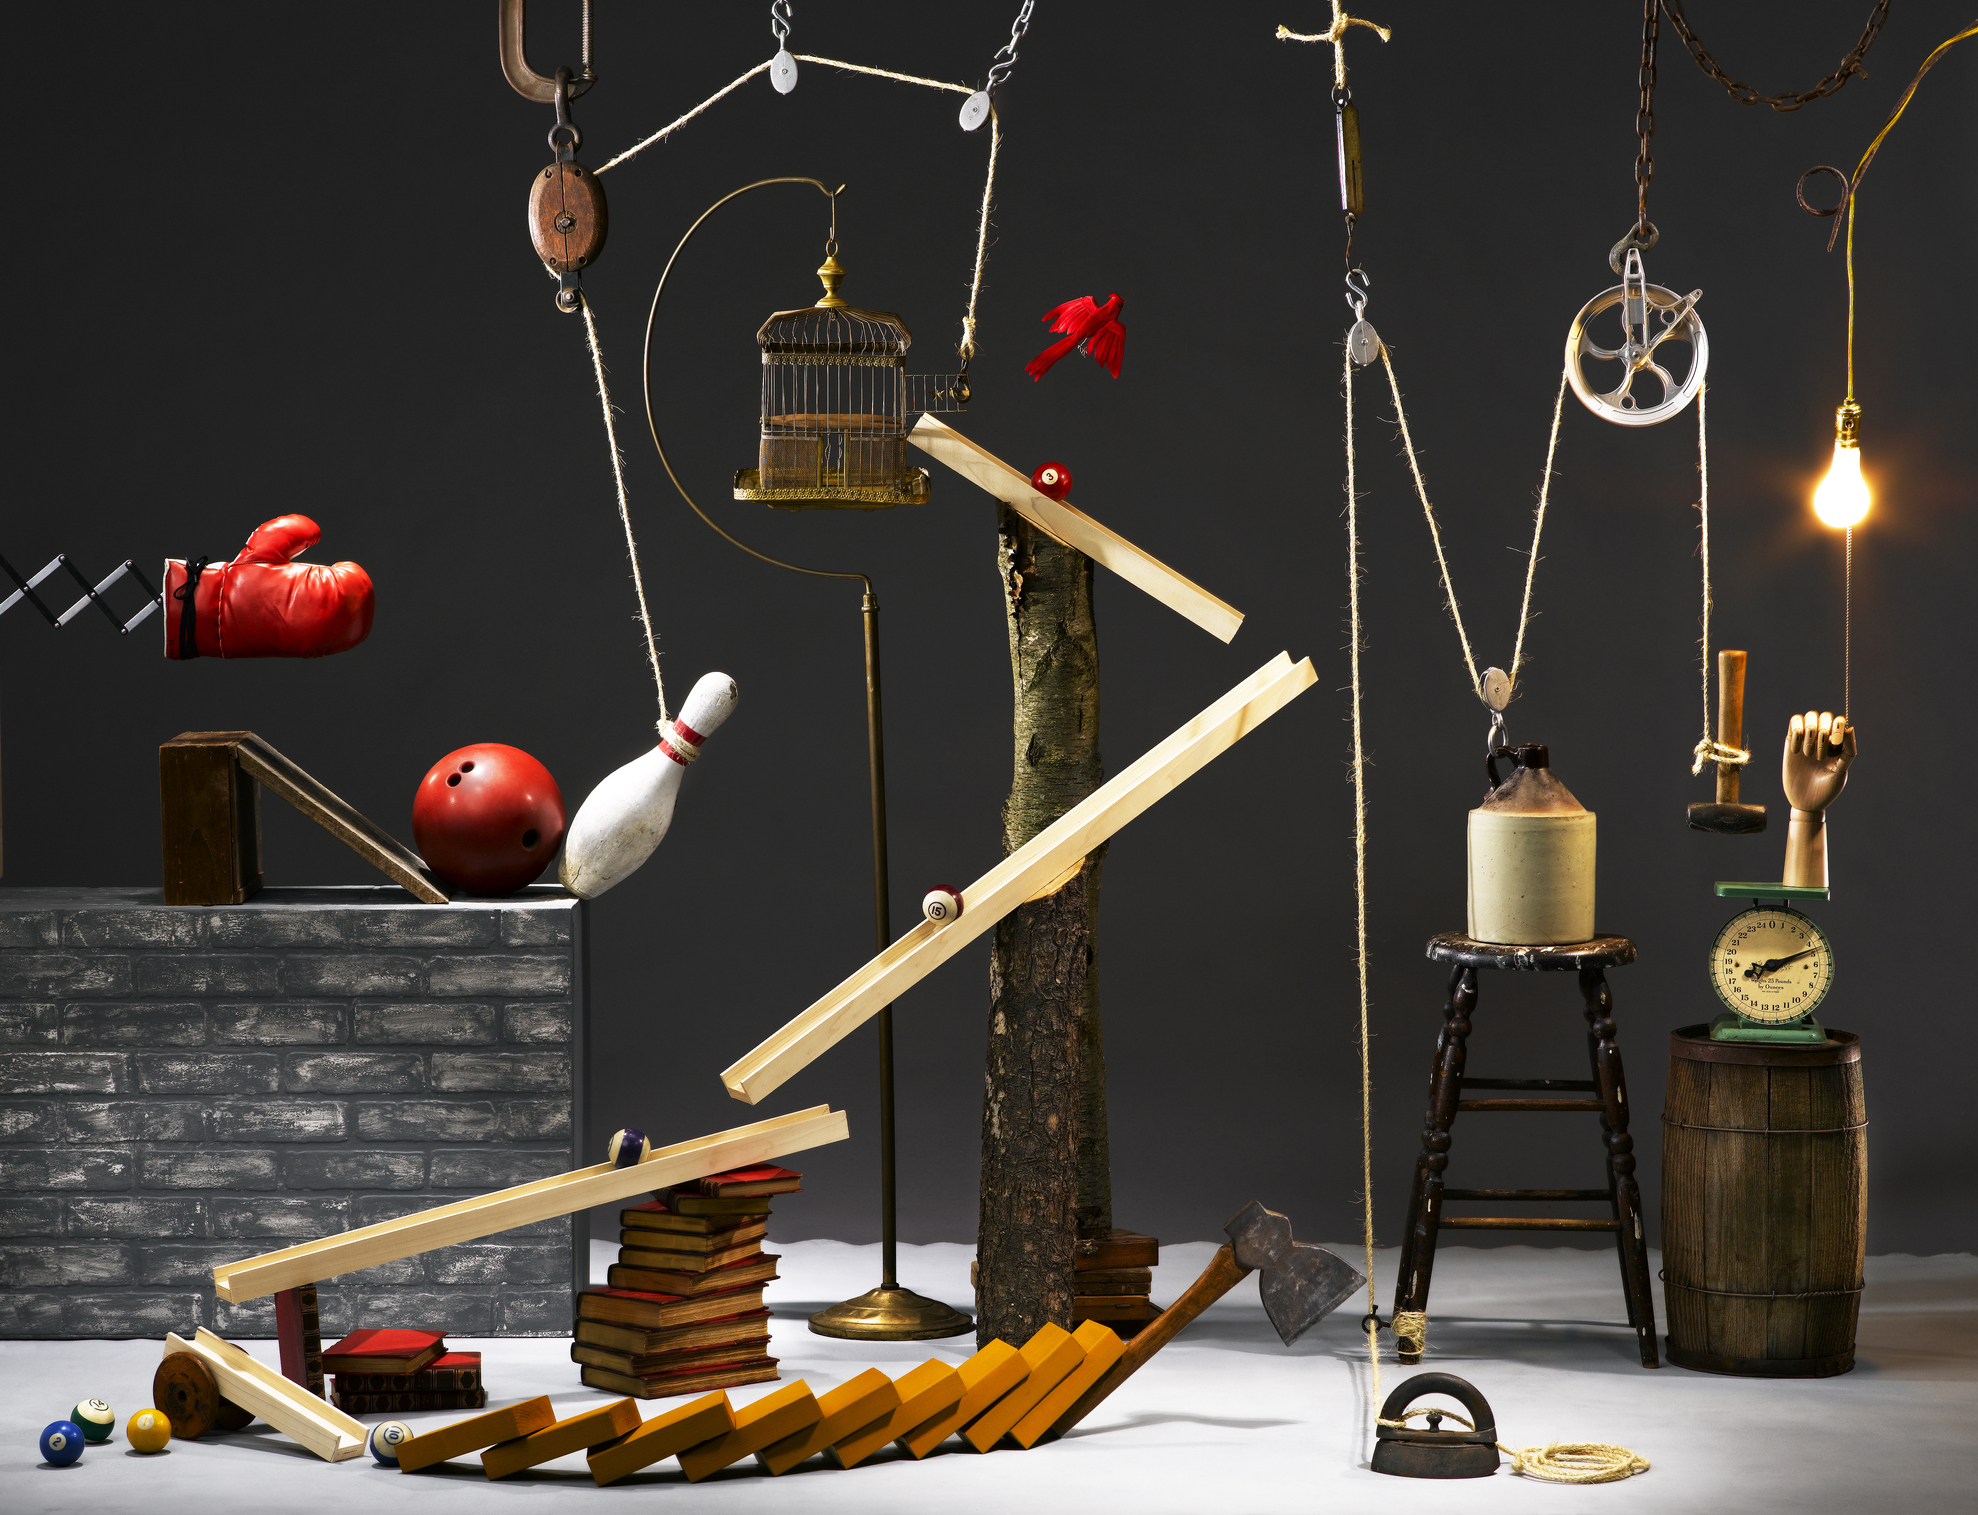 An image of a rube goldberg machine with a gray background 